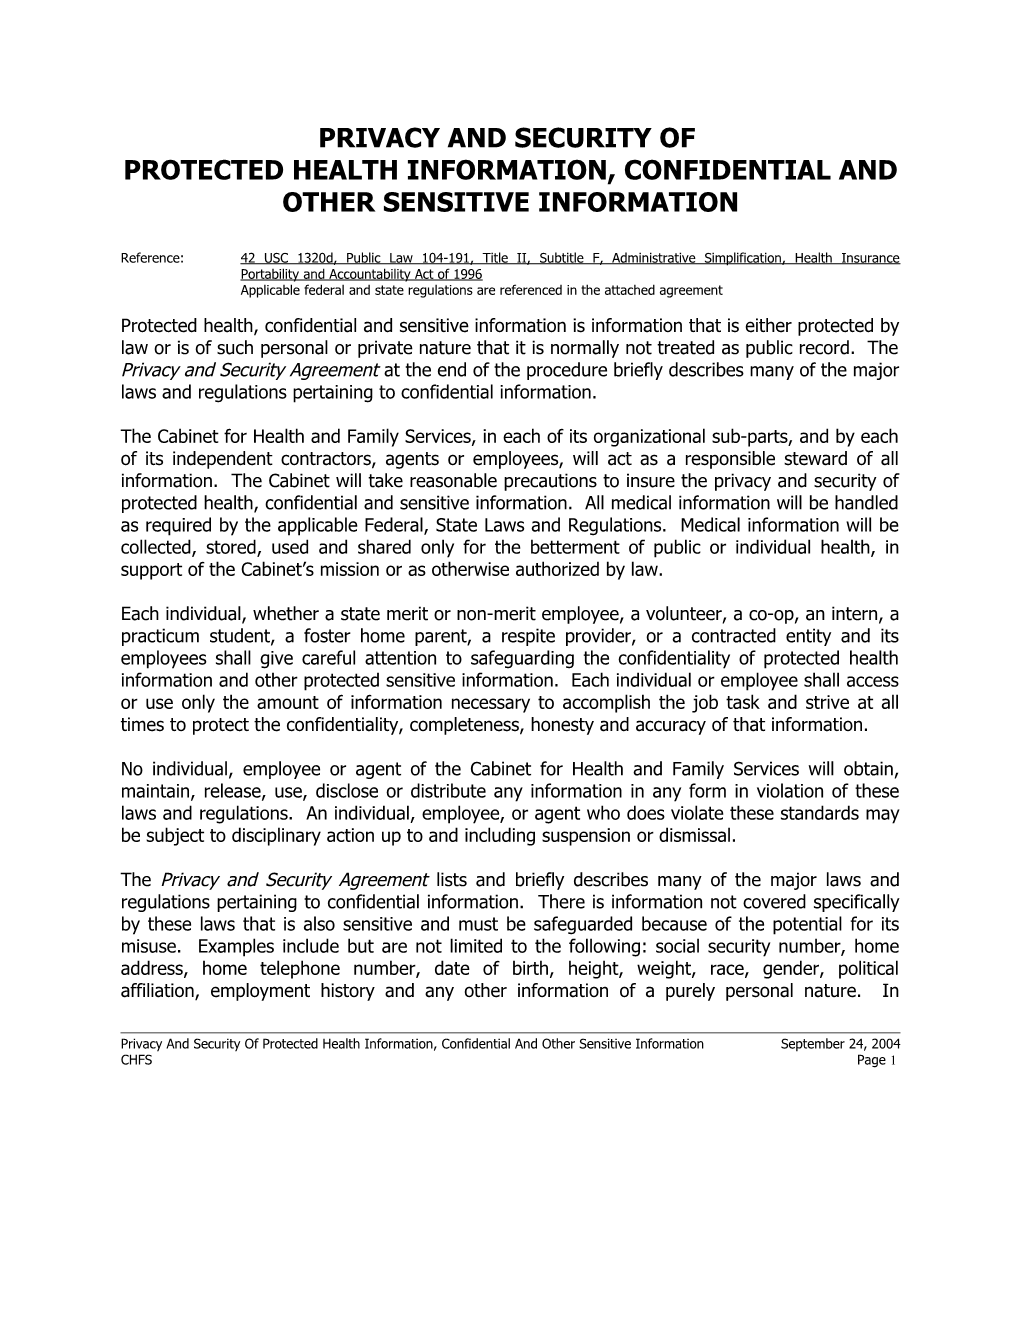 Privacy And Security Of Protected Health Information, Confidential And Other Sensitive Information